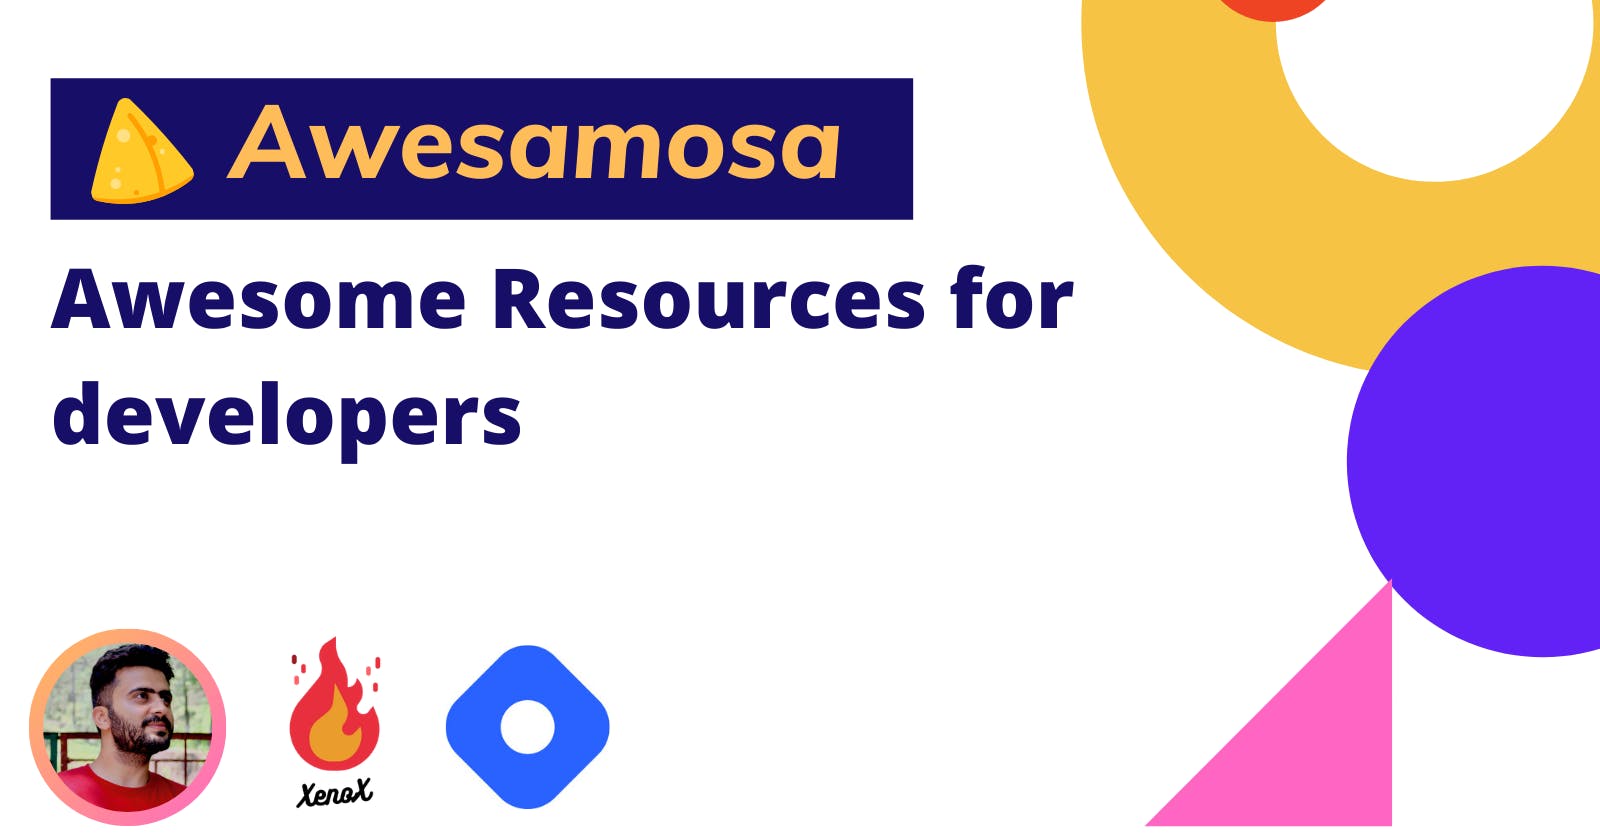 #1 Awesamosa: Awesome Resources for developers